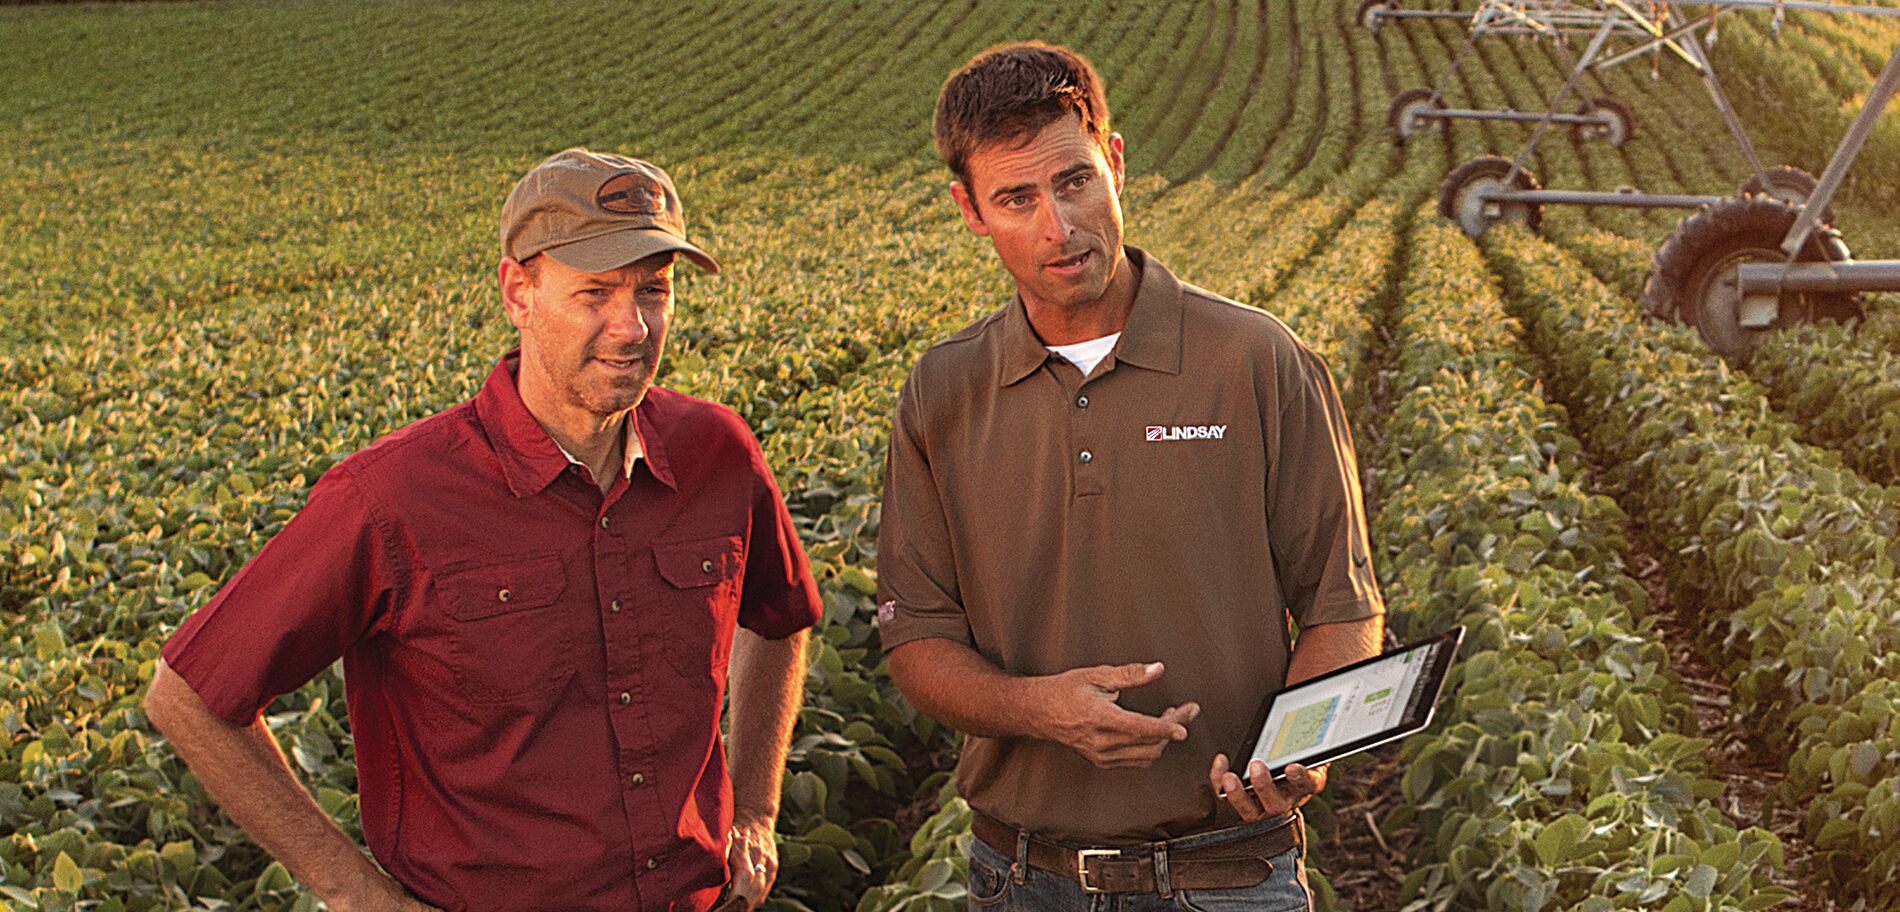 Efficient Irrigation is Critical to the Future of Farming